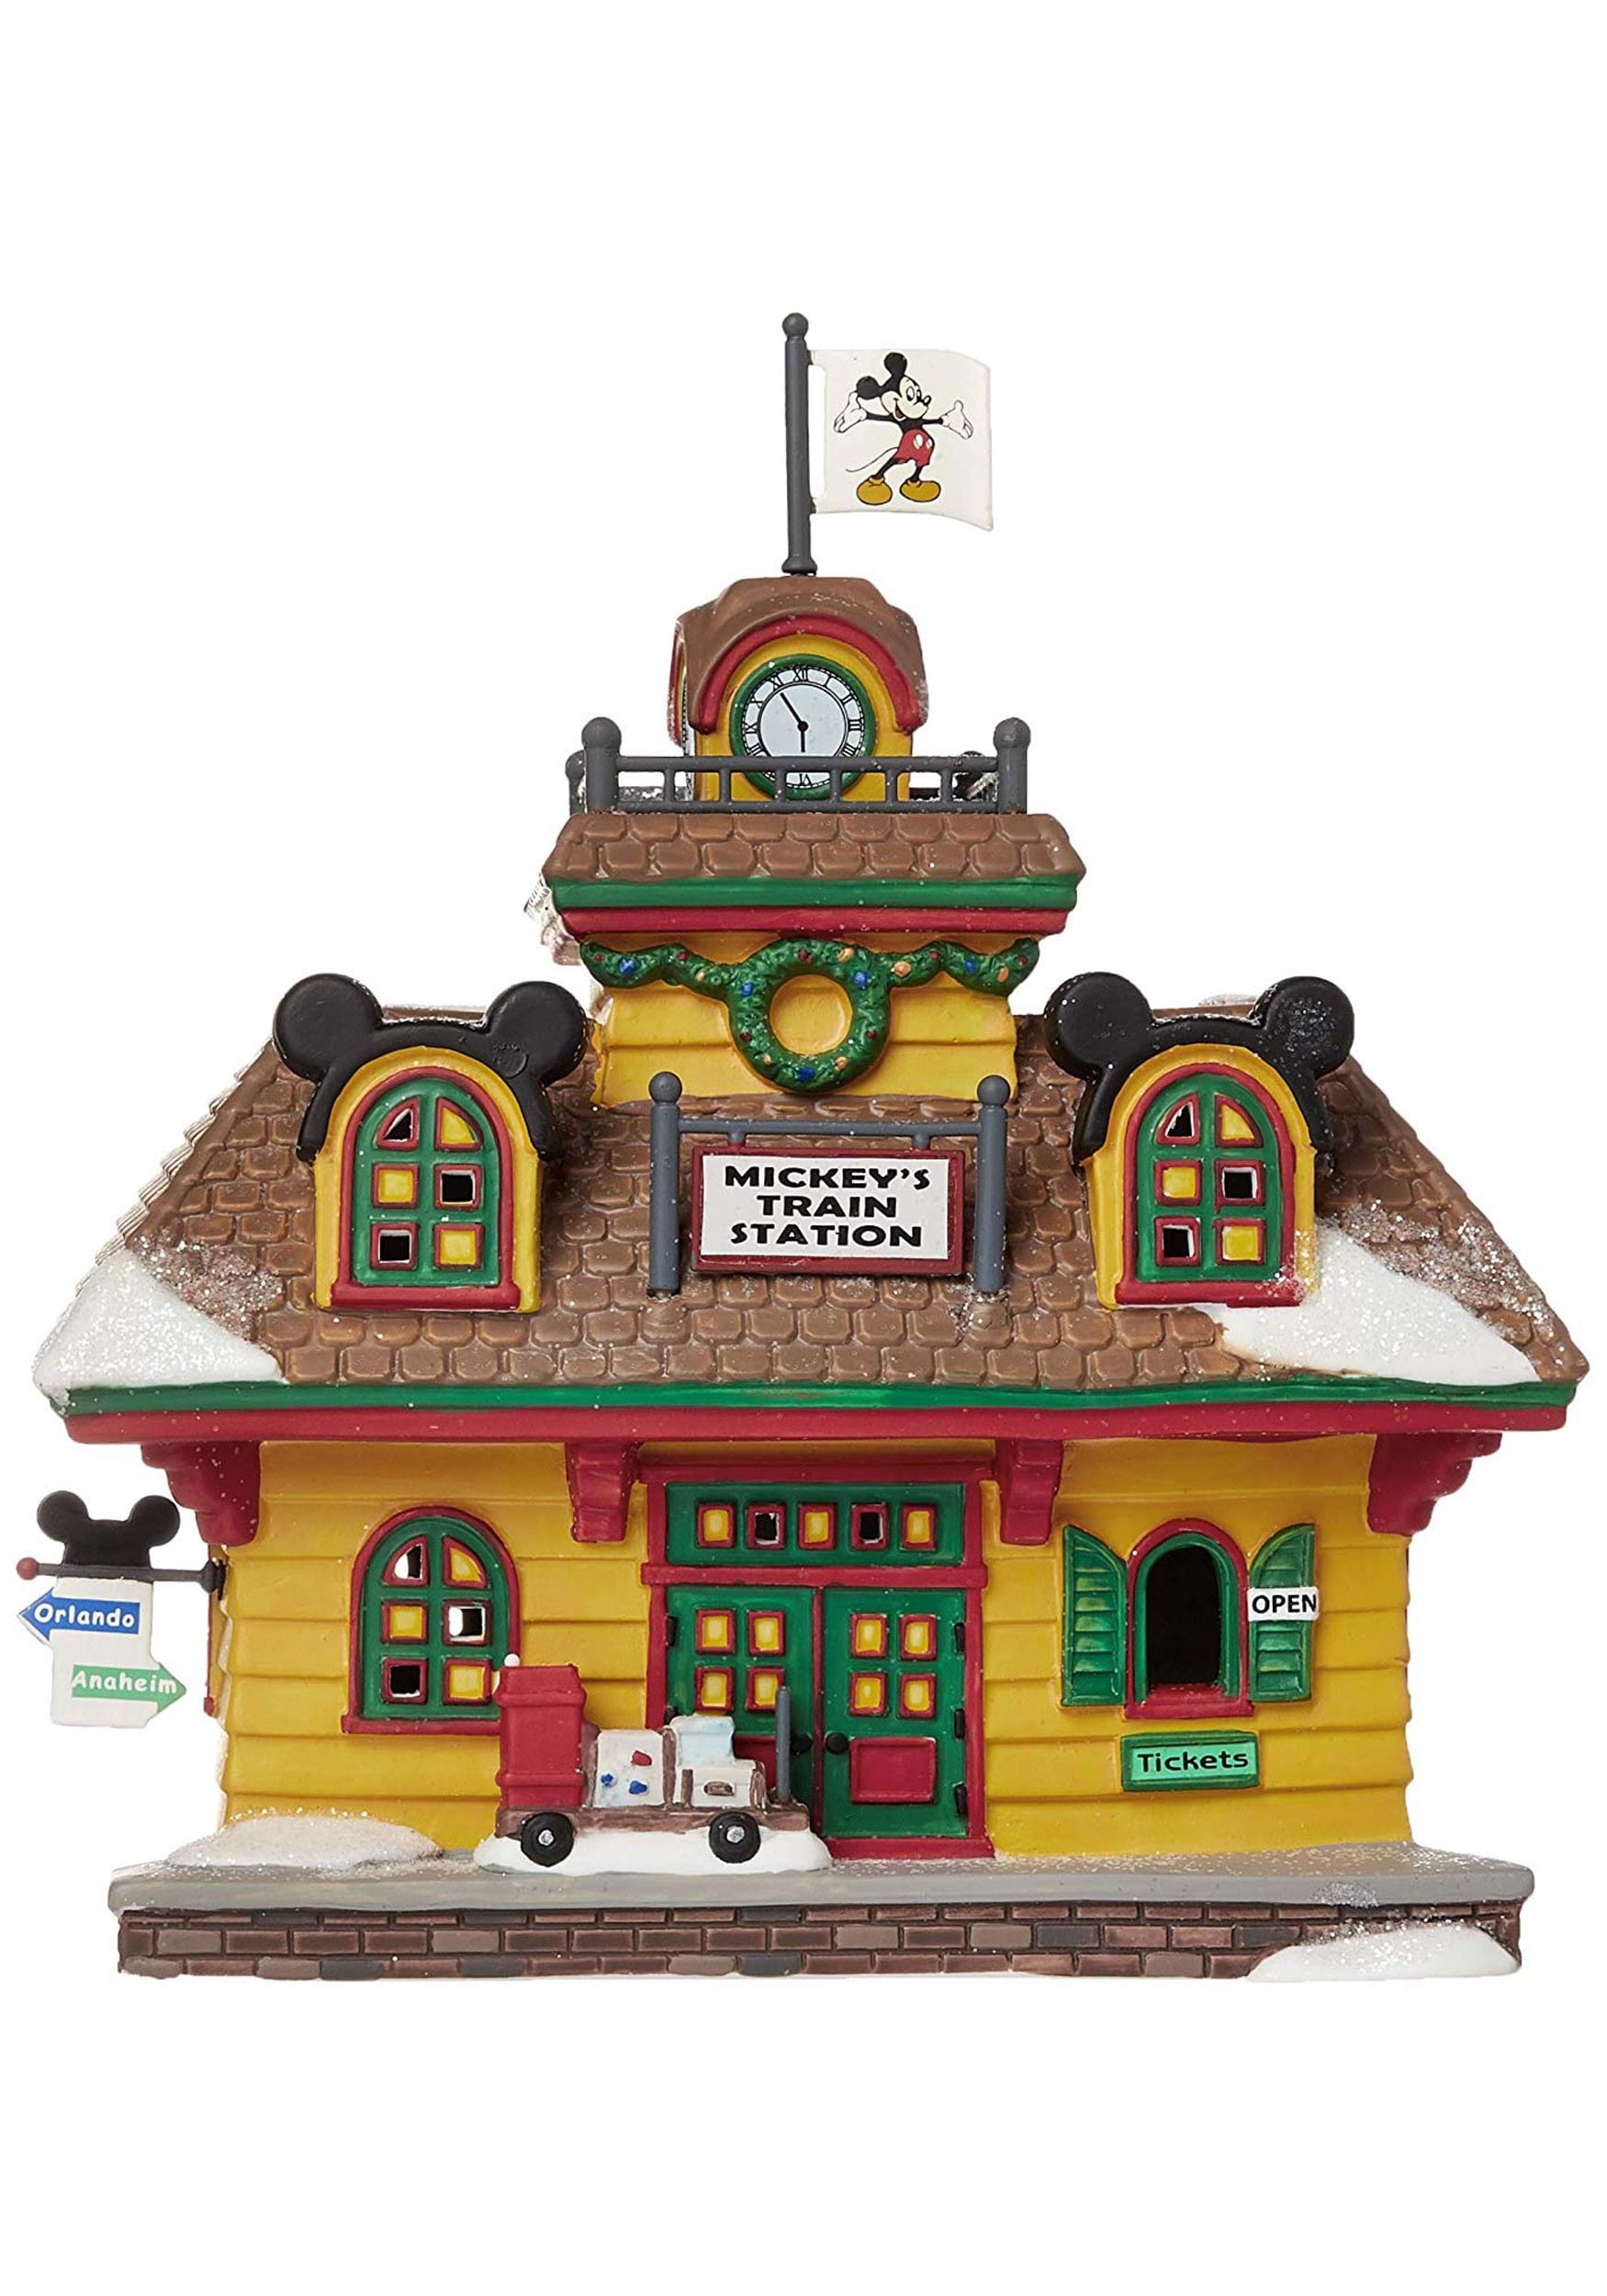 Department 56 Mickey's Train Station